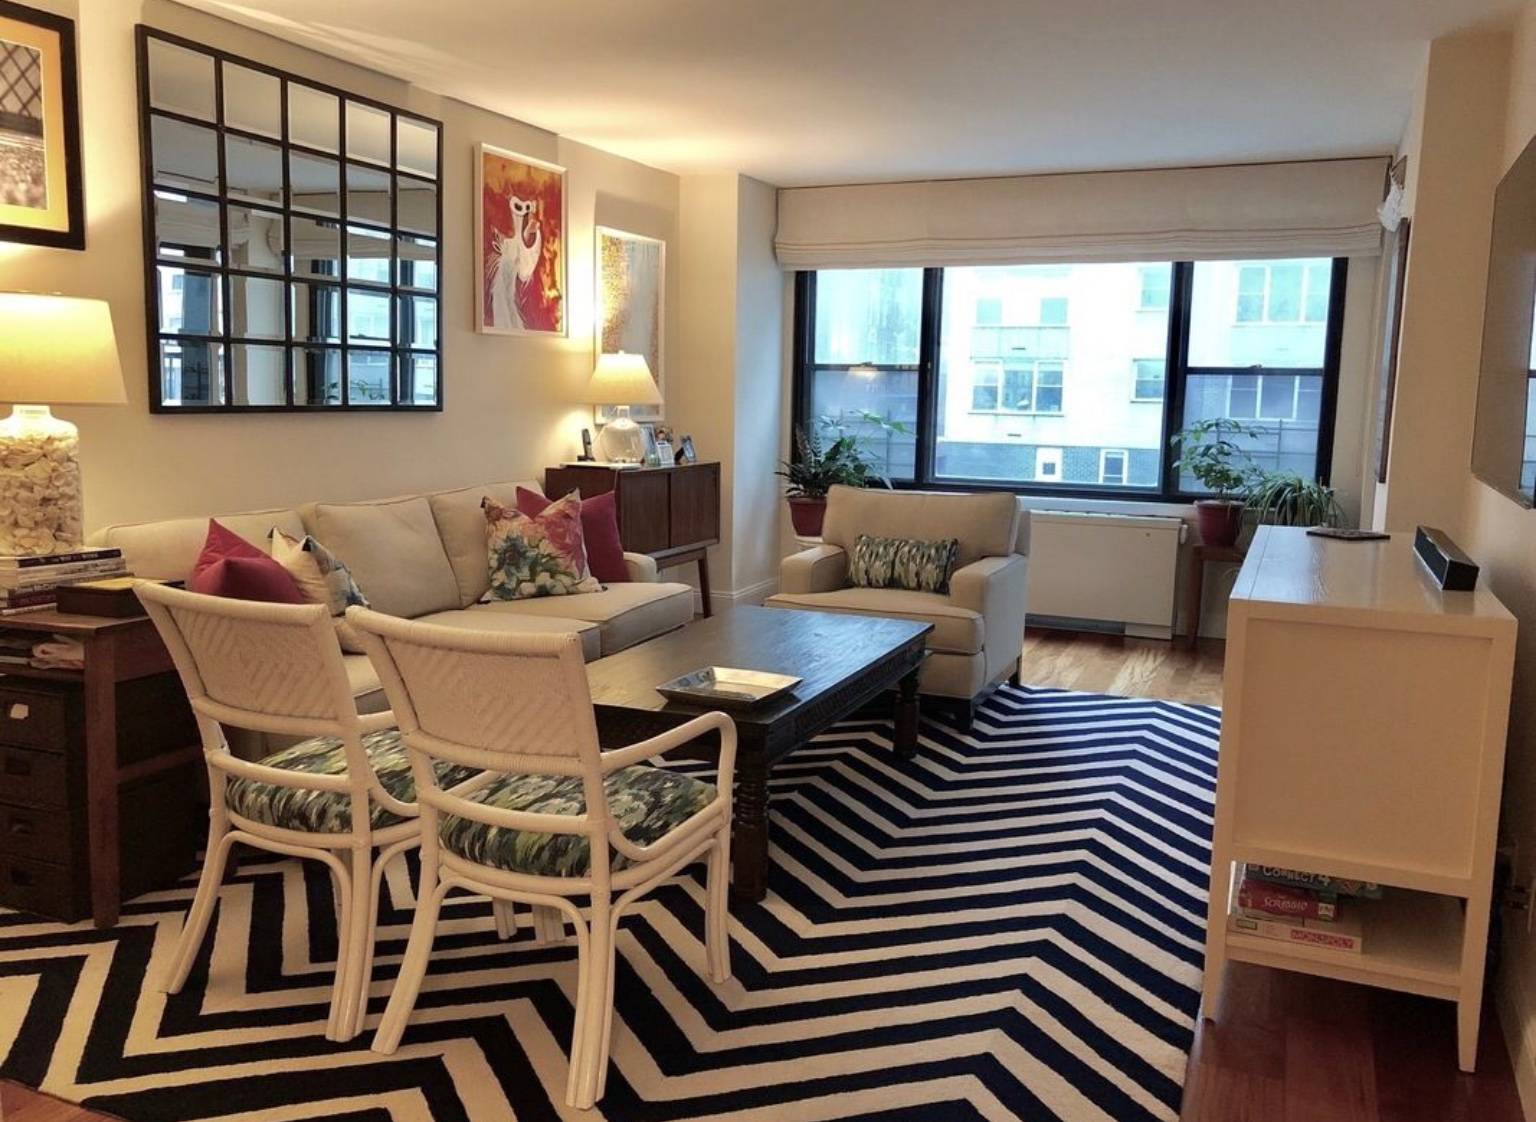 Large 1 bedroom corner unit with balcony in Prime Lenox Hill